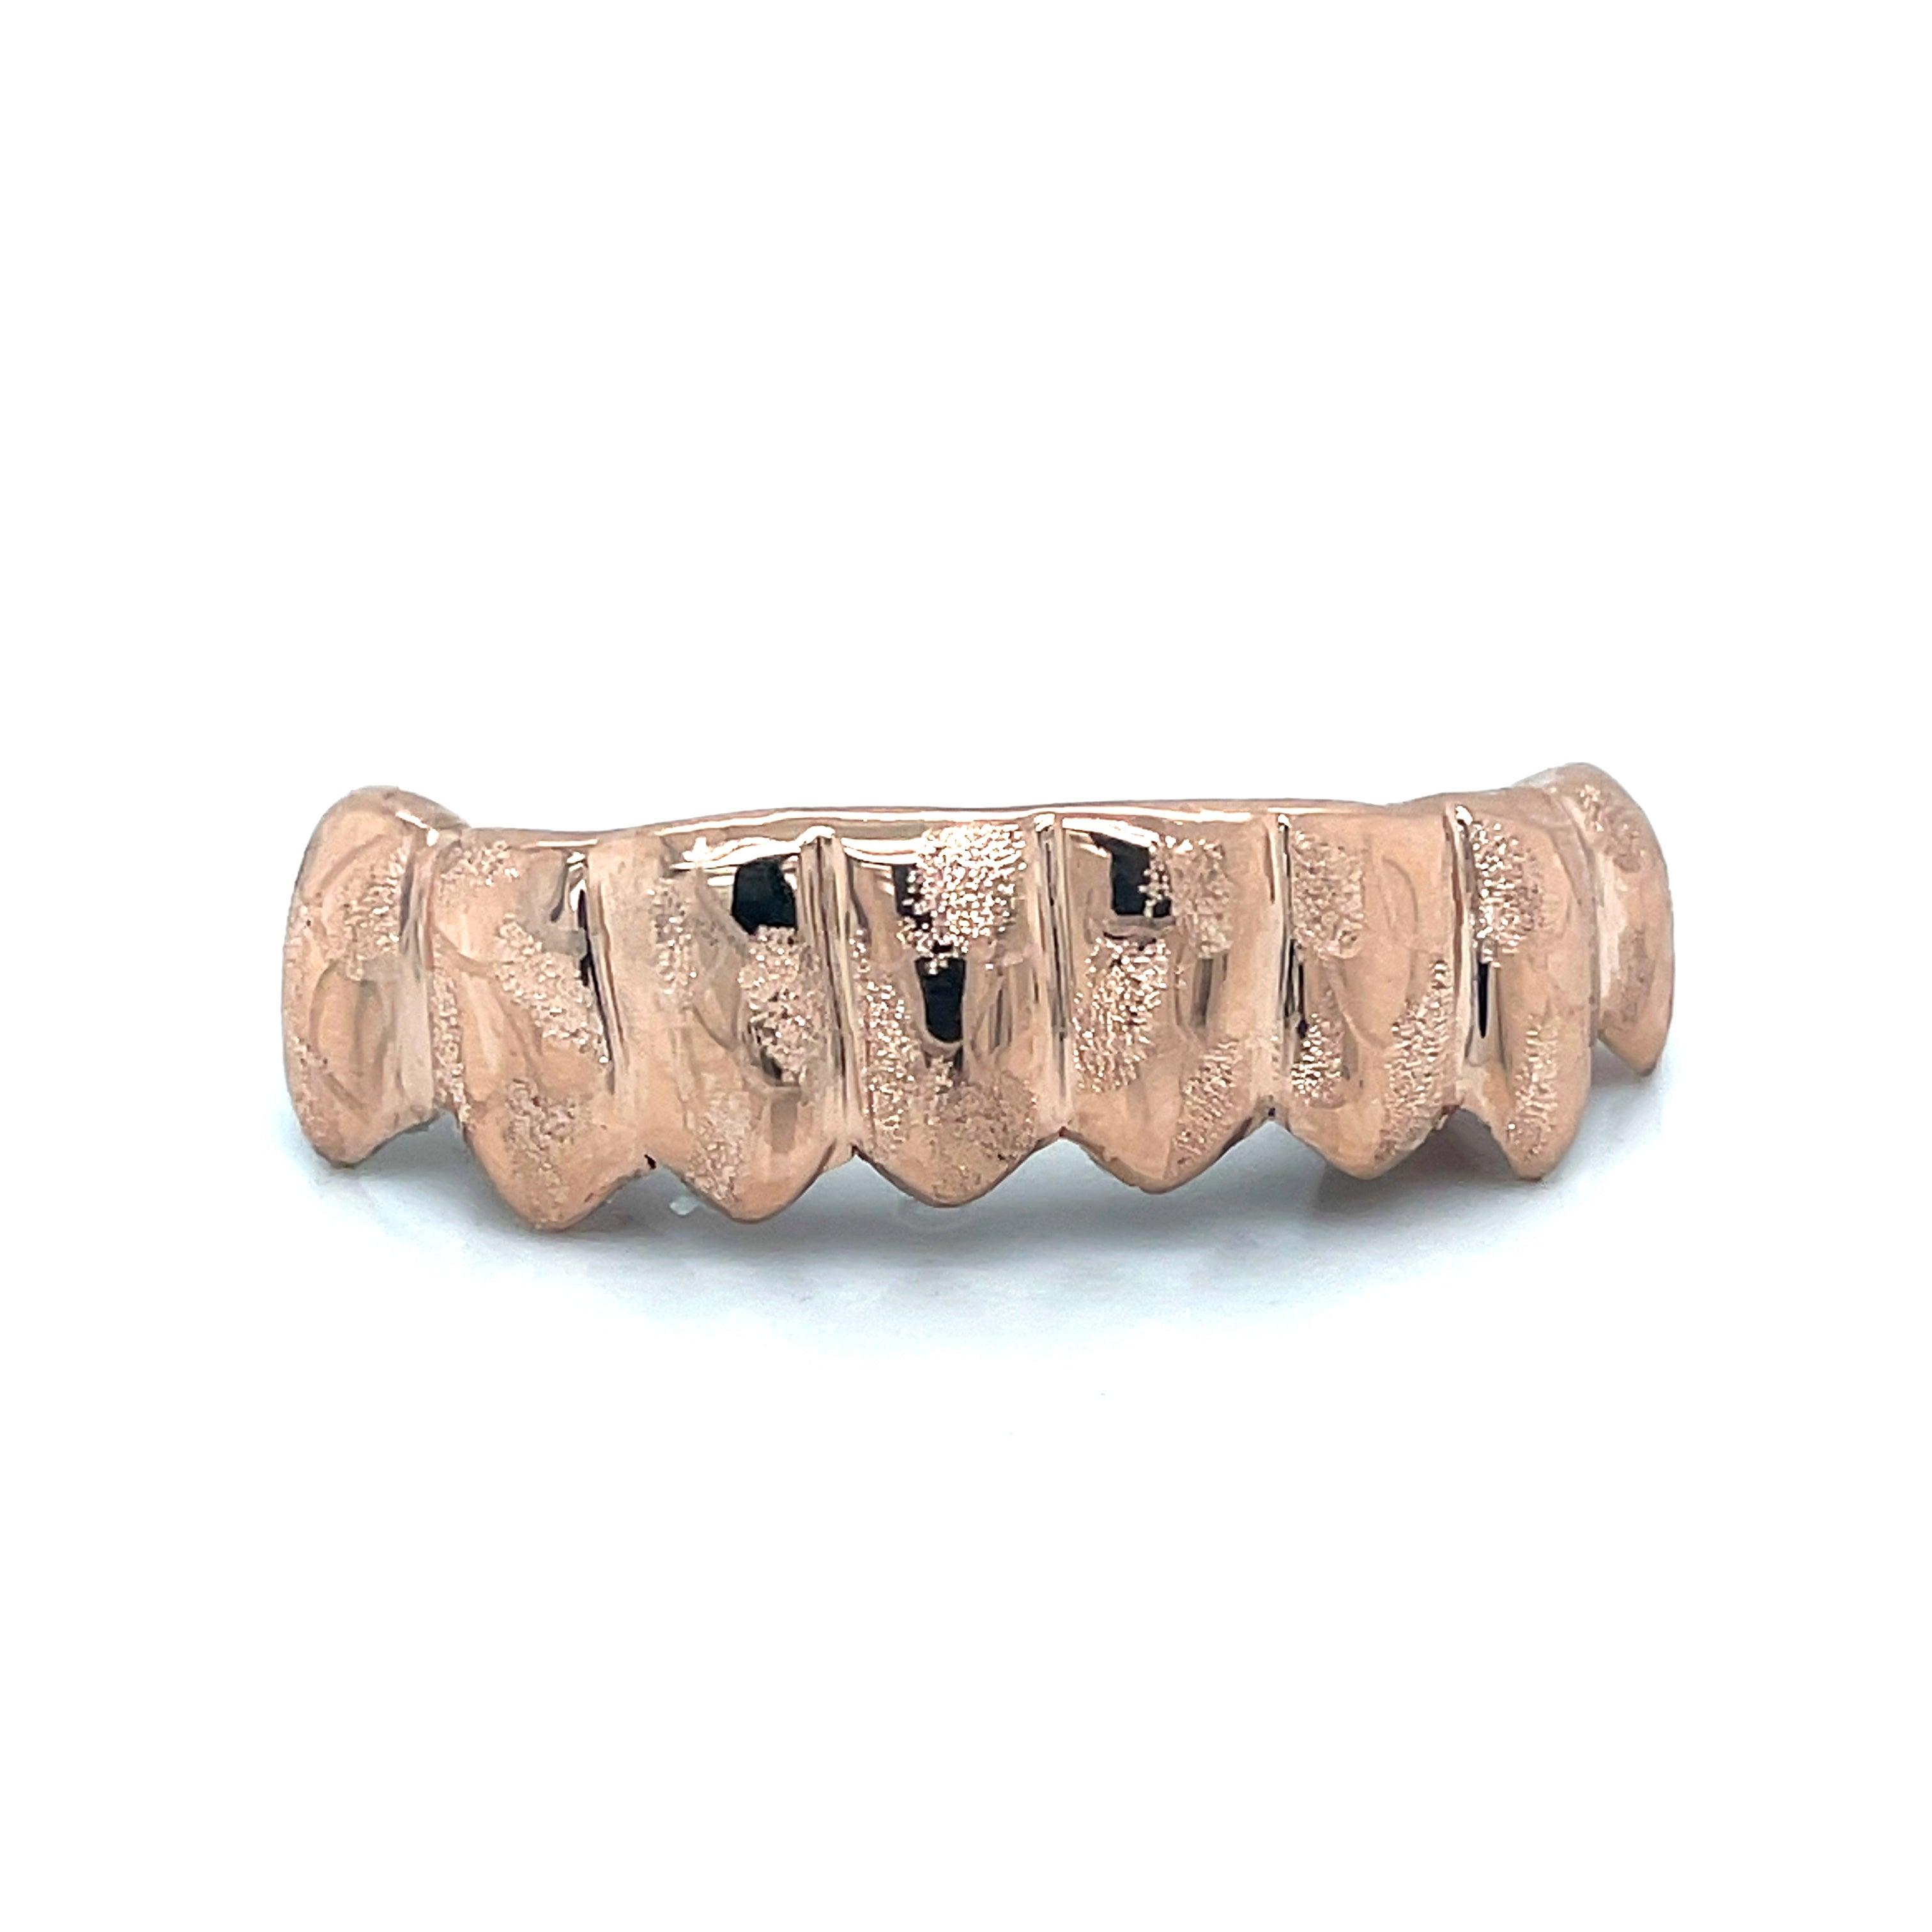 8pc Rose Gold Earth Cut Bottom Grillz - Seattle Gold Grillz